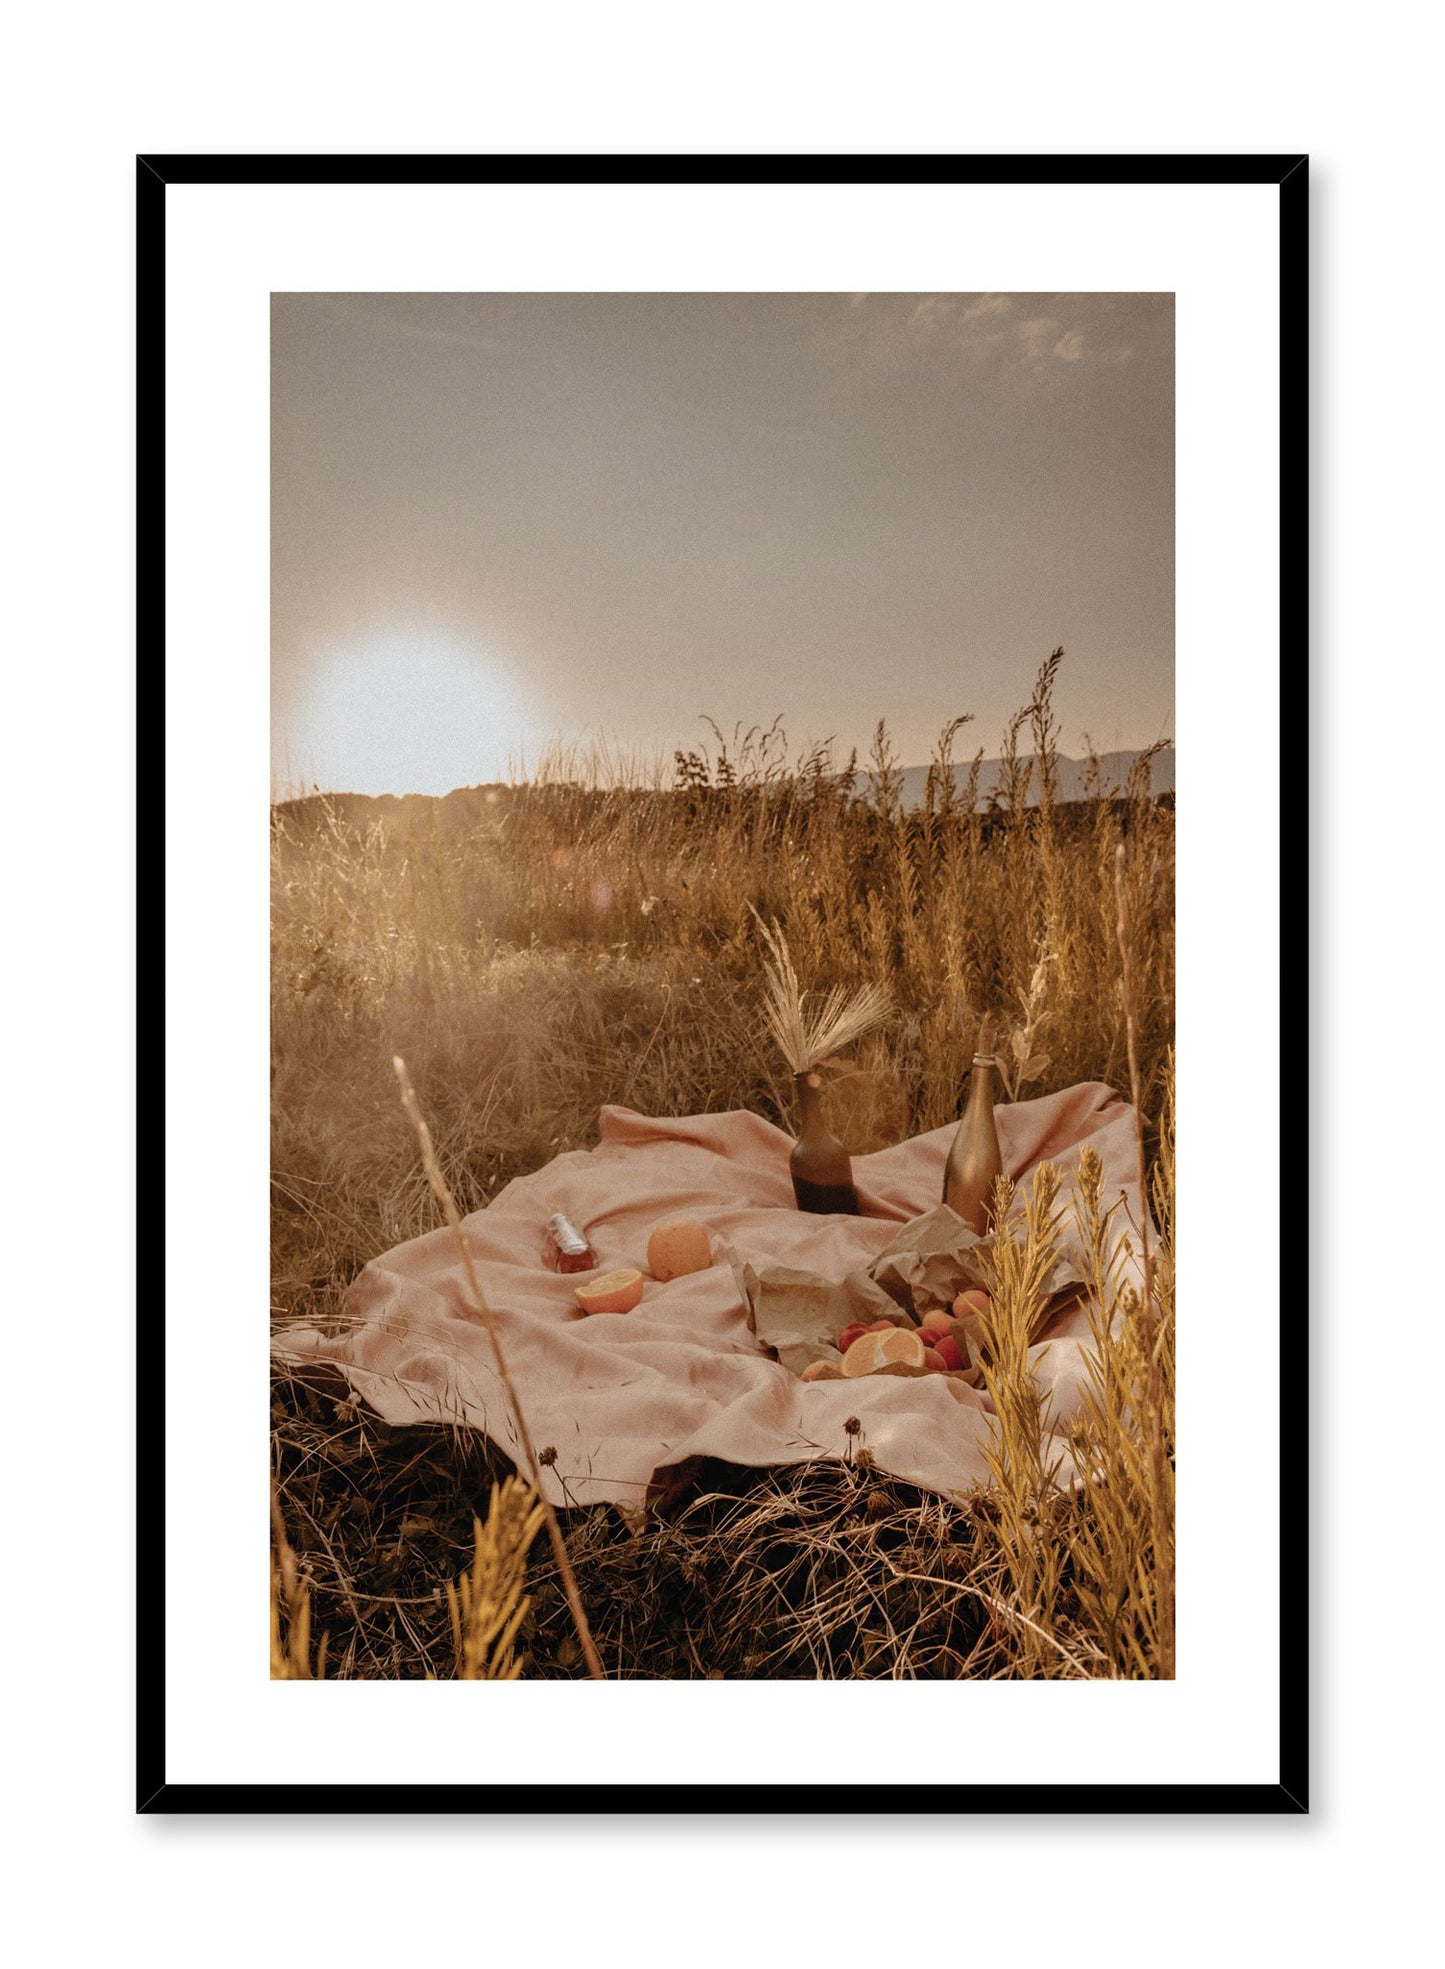 Perfect Date is sunny picnic photography poster by Opposite Wall.